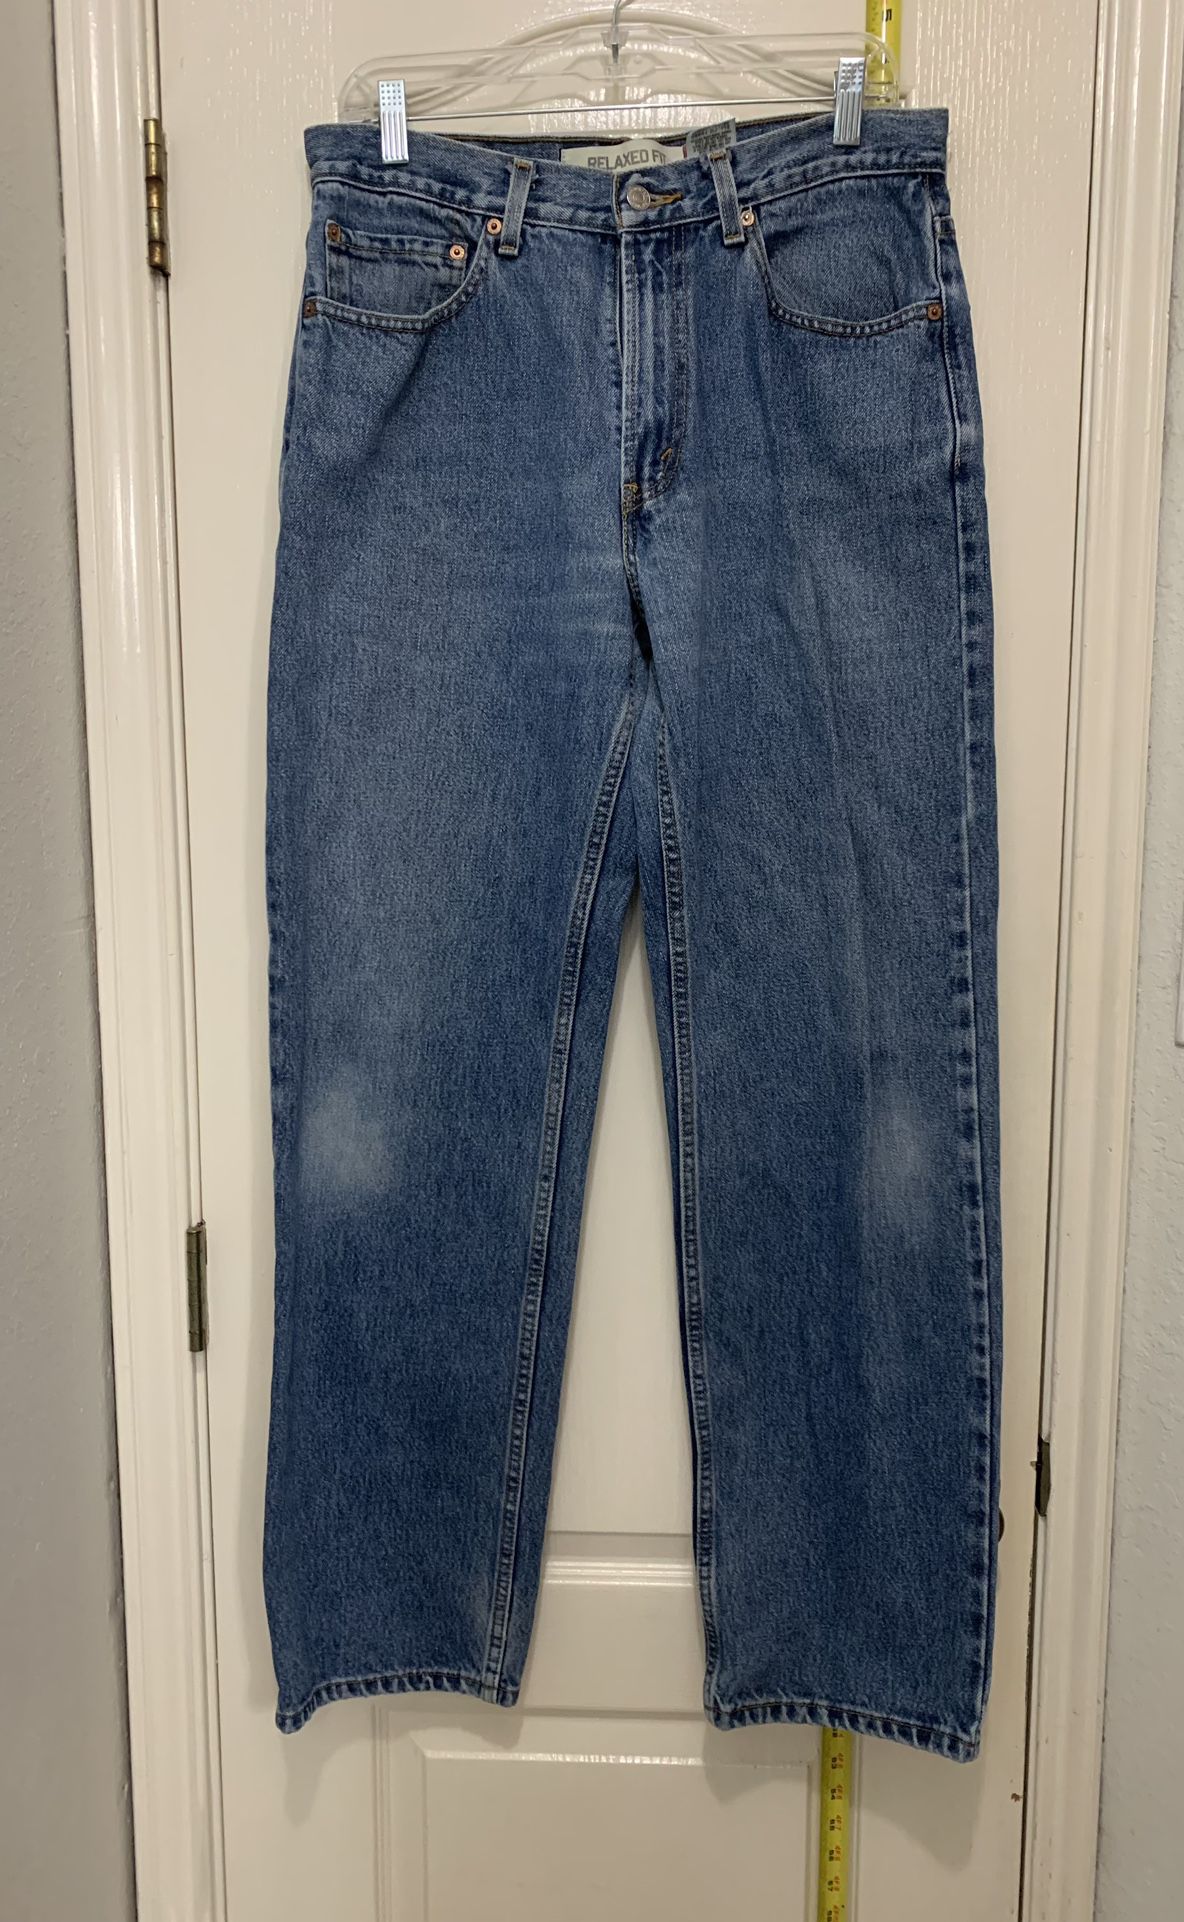 Mens Levi’s Relaxed Fit 550 32x32 Jeans